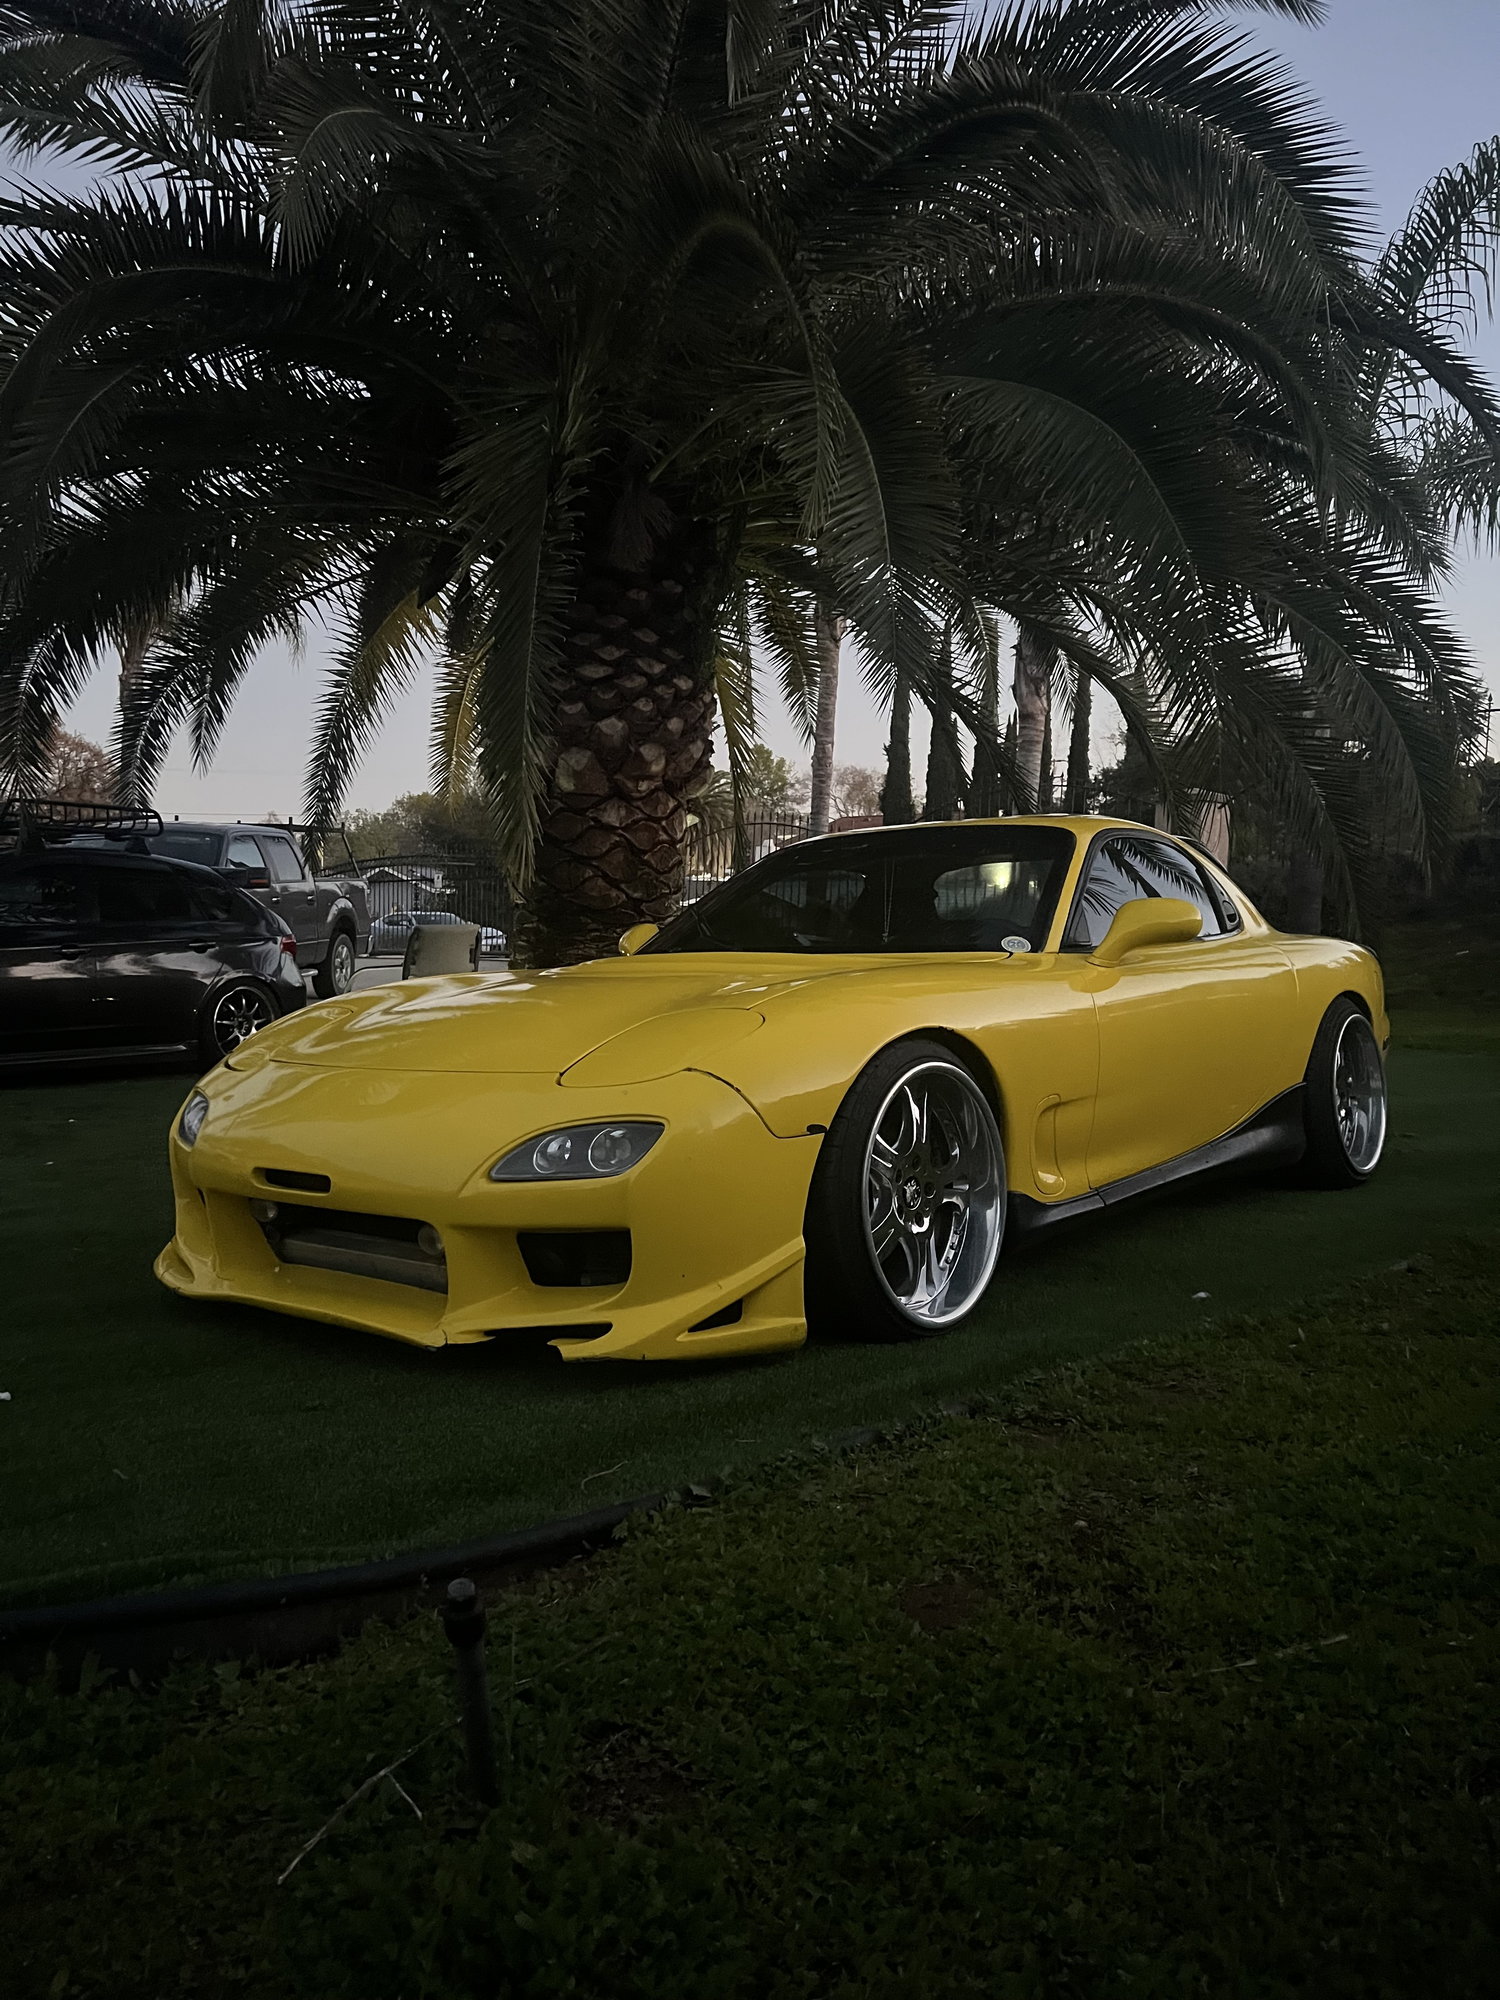 1993 Mazda RX-7 - WTS 1993 Mazda RX-7 - Used - VIN JM1FD3317P0205751 - 130,000 Miles - Other - Manual - Yellow - Escondido, CA 92025, United States